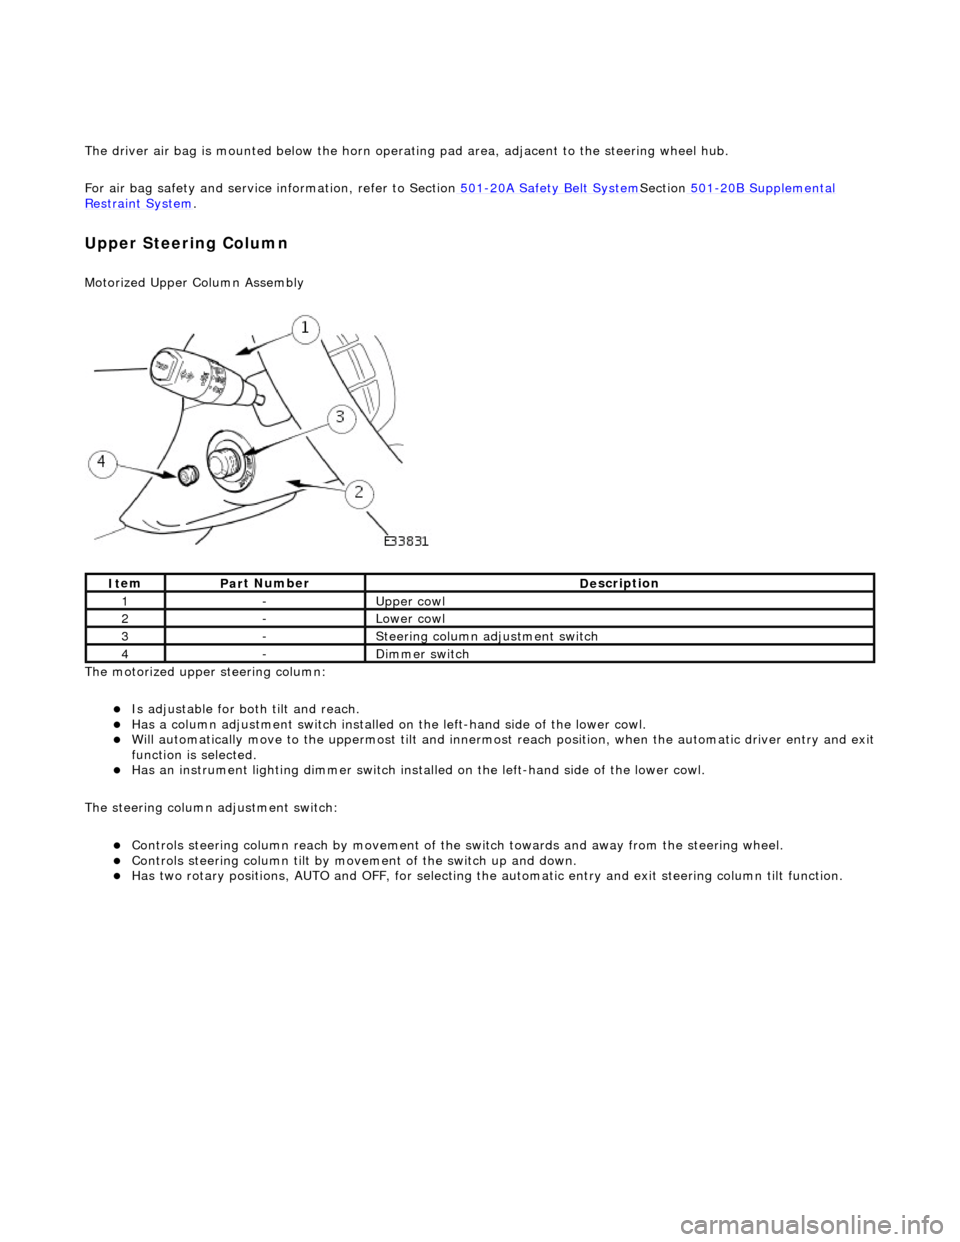 JAGUAR X308 1998 2.G Workshop Manual The driver air bag is moun
ted below the horn operat
ing pad area, adjacent to the steering wheel hub. 
For air bag safety and service  information, refer to Section 501
-20A Safety Belt 
 System
Sect